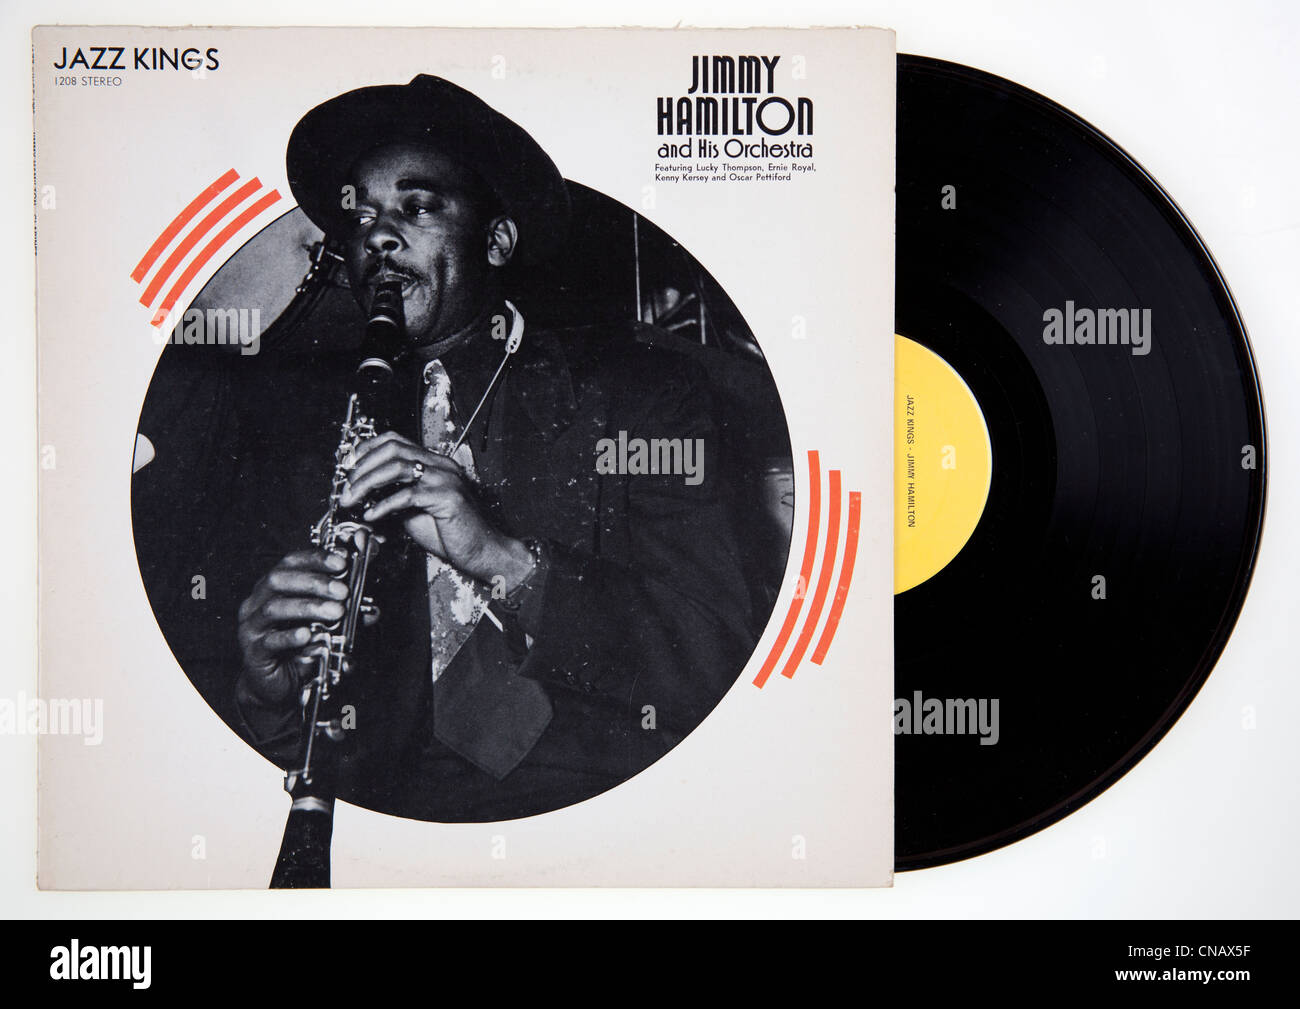 Cover of vinyl album 'TJimmy Hamilton and His Orchestra', released on Jazz Kings Records Stock Photo